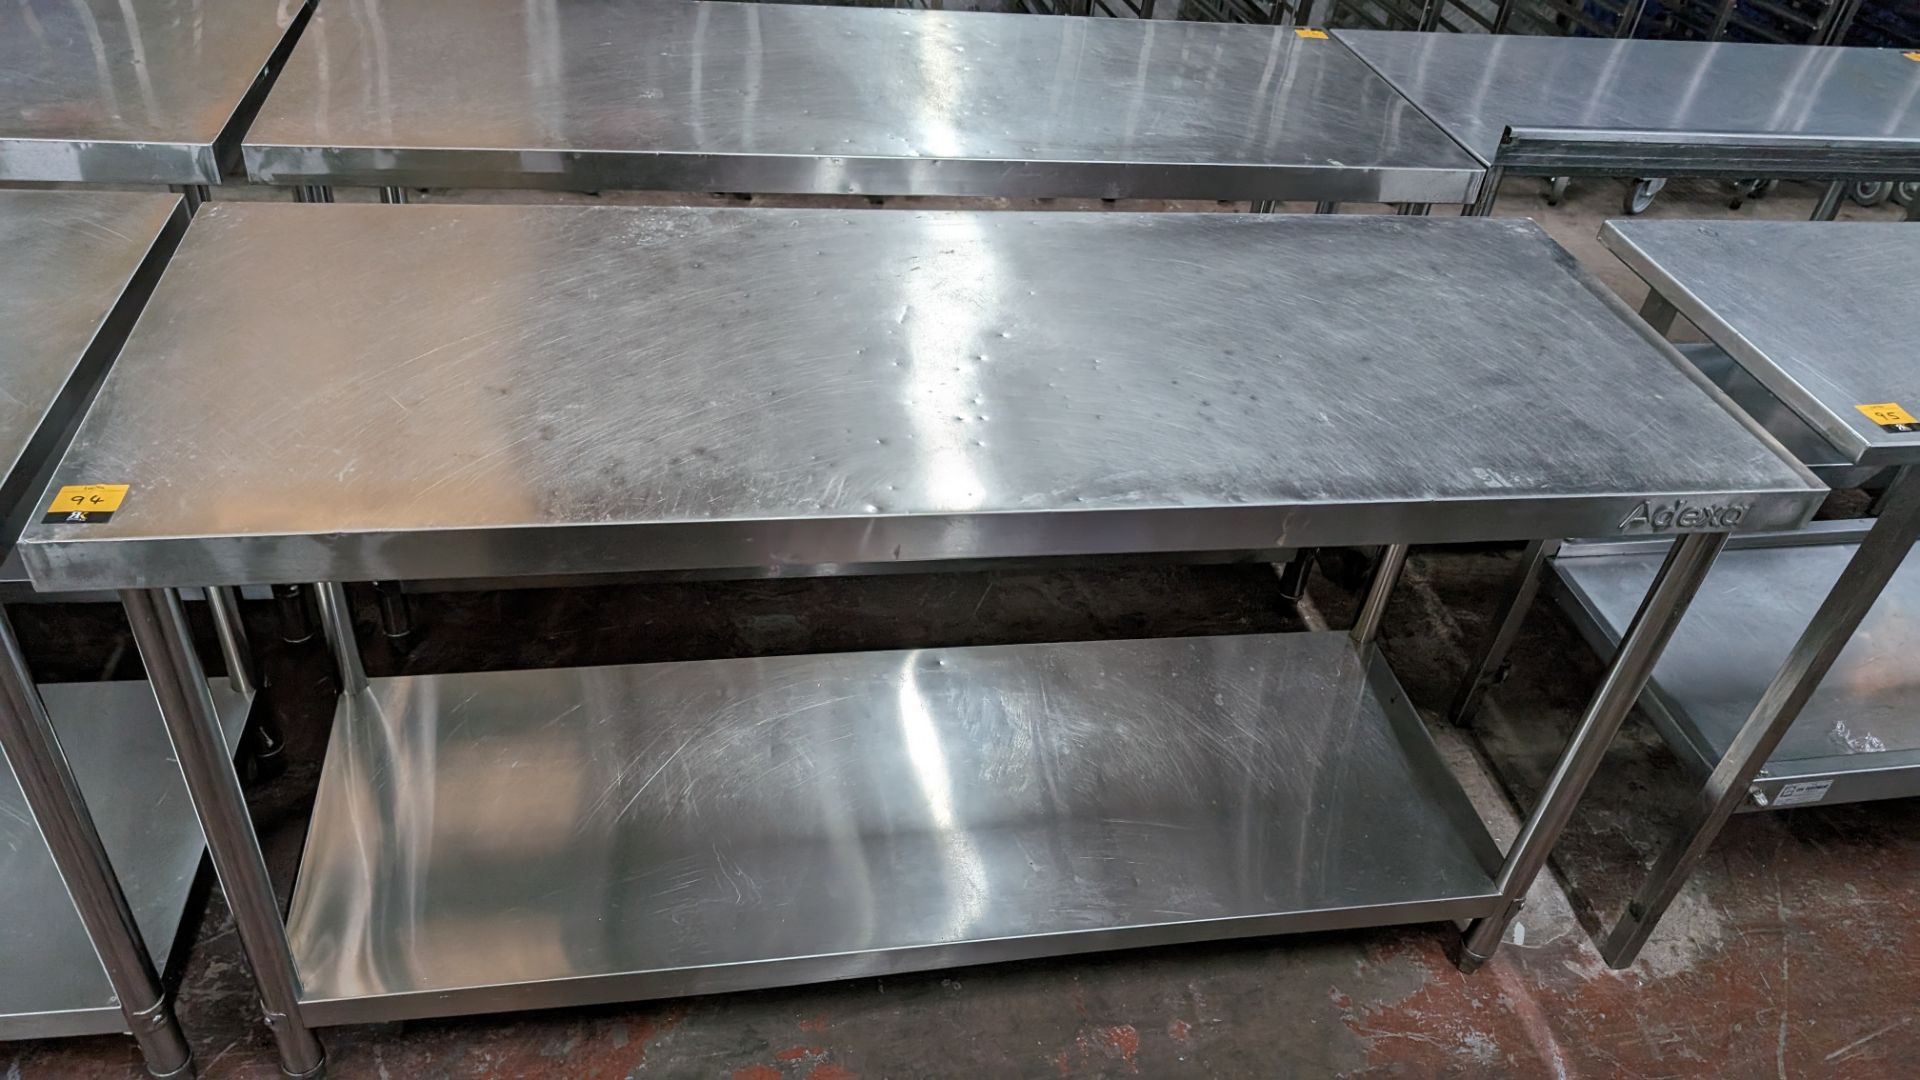 Adexa stainless steel twin tier table, max dimensions 1600 x 600 x 860mm - Image 2 of 3